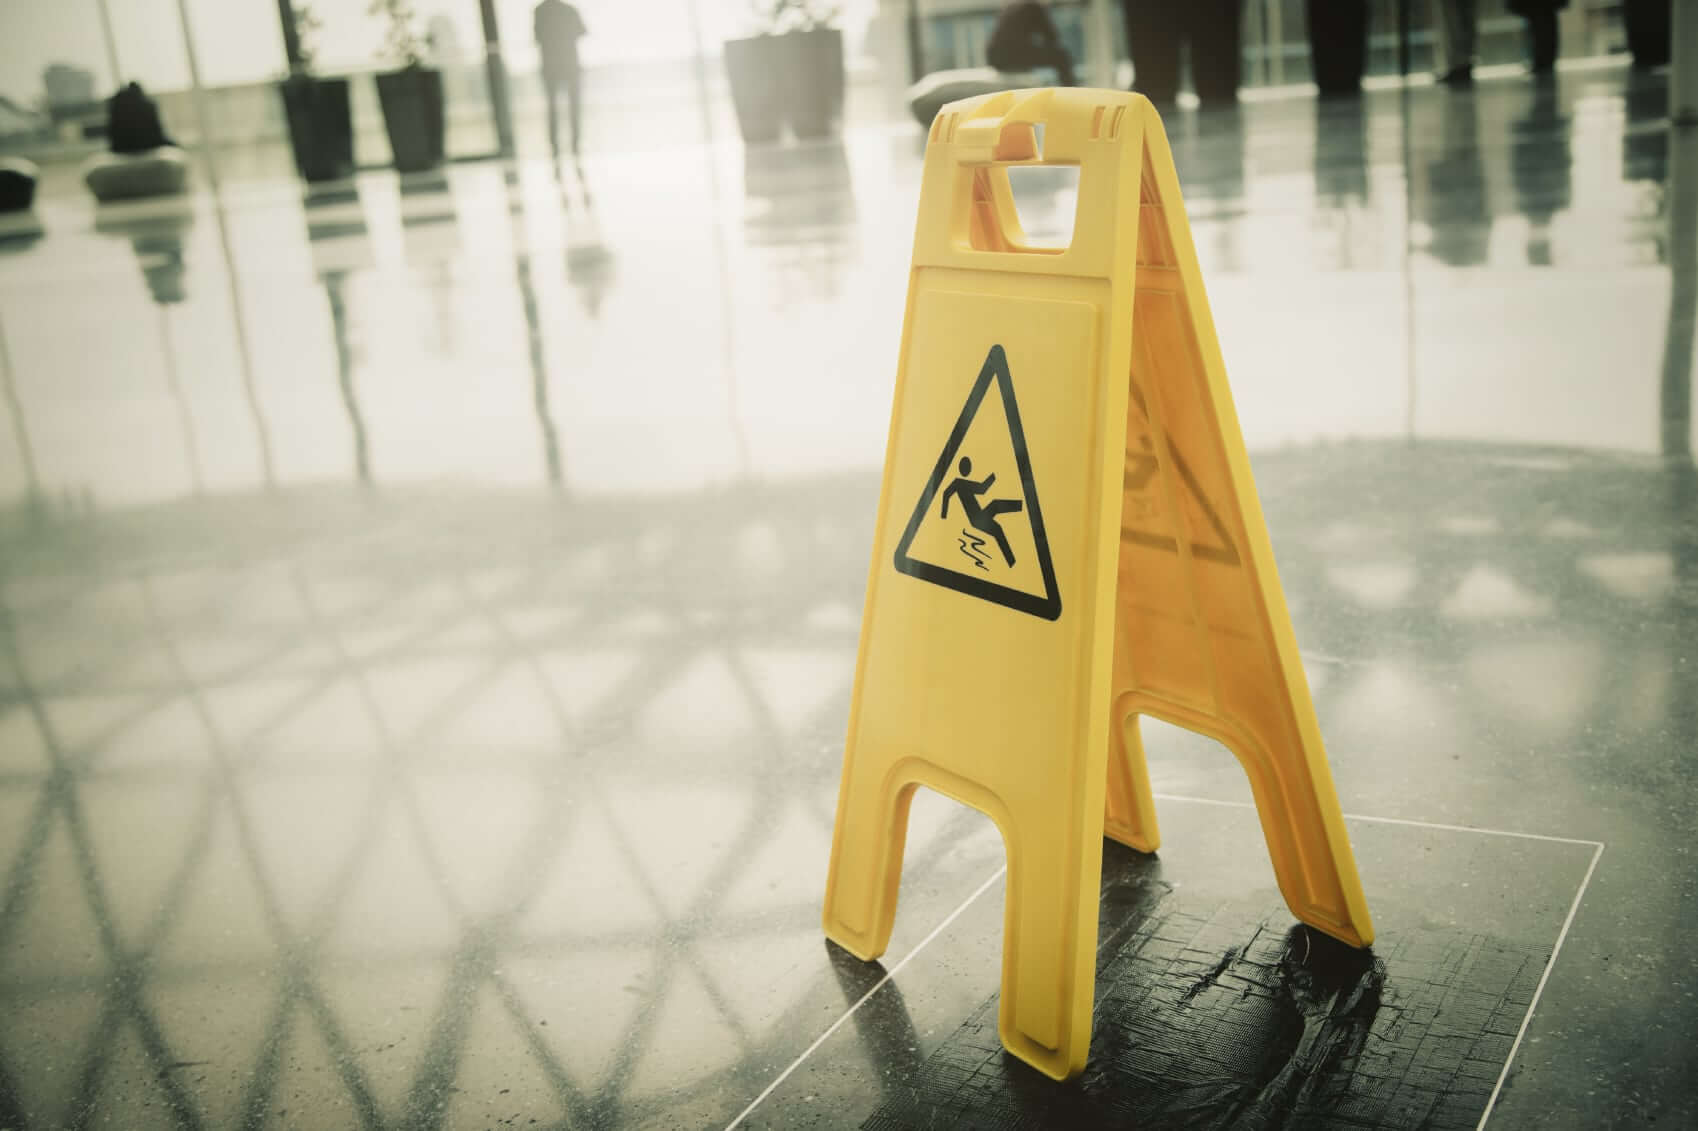 Slip And Fall Accident Attorney Near Me